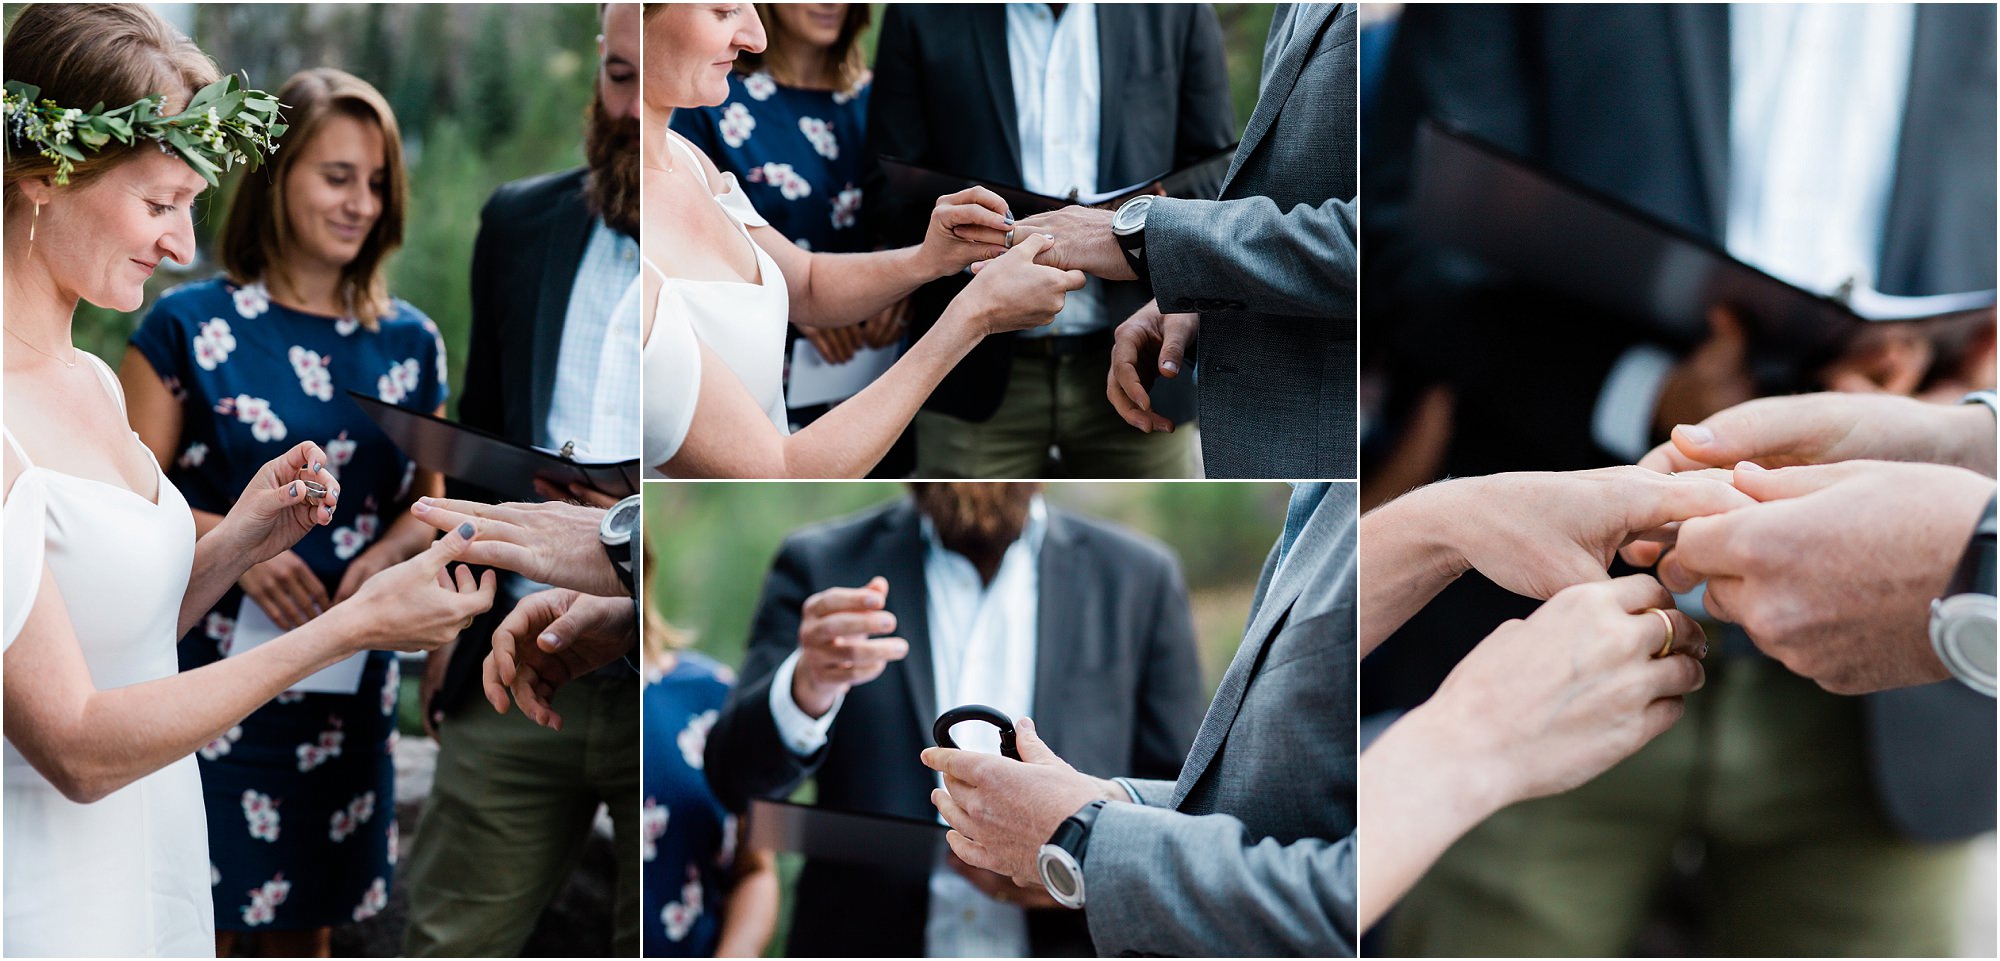 Wedding rings are delivered on a Metolius climber carabiner, perfect for this outdoorsy adventure elopement at Tumalo Falls in Bend, Oregon. | Erica Swantek Photography